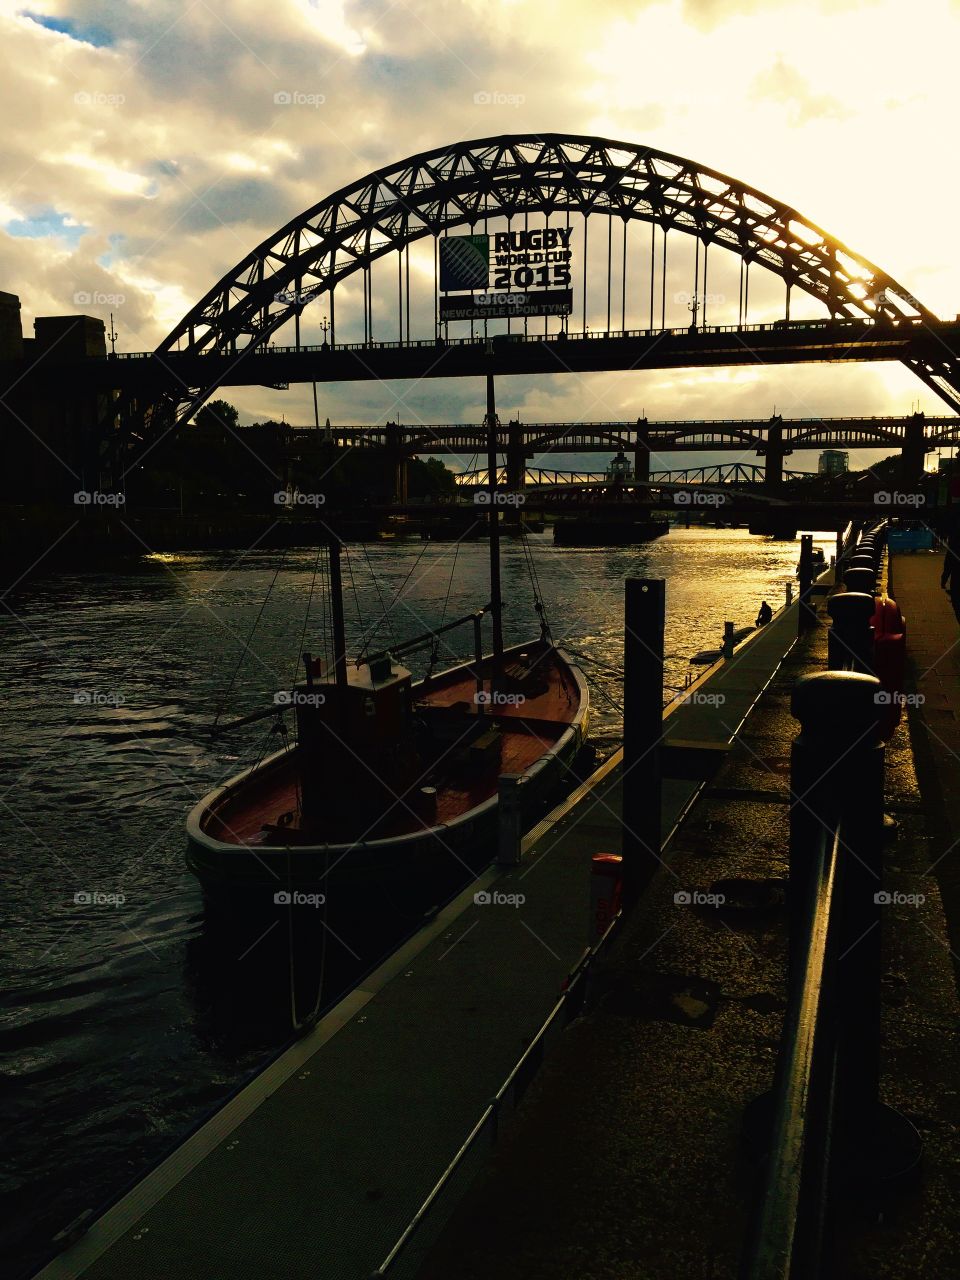 Newcastle Quayside at sunset. . The sun sets behind the Tyne Bridge and Rugby World Cup 2015 logo. 